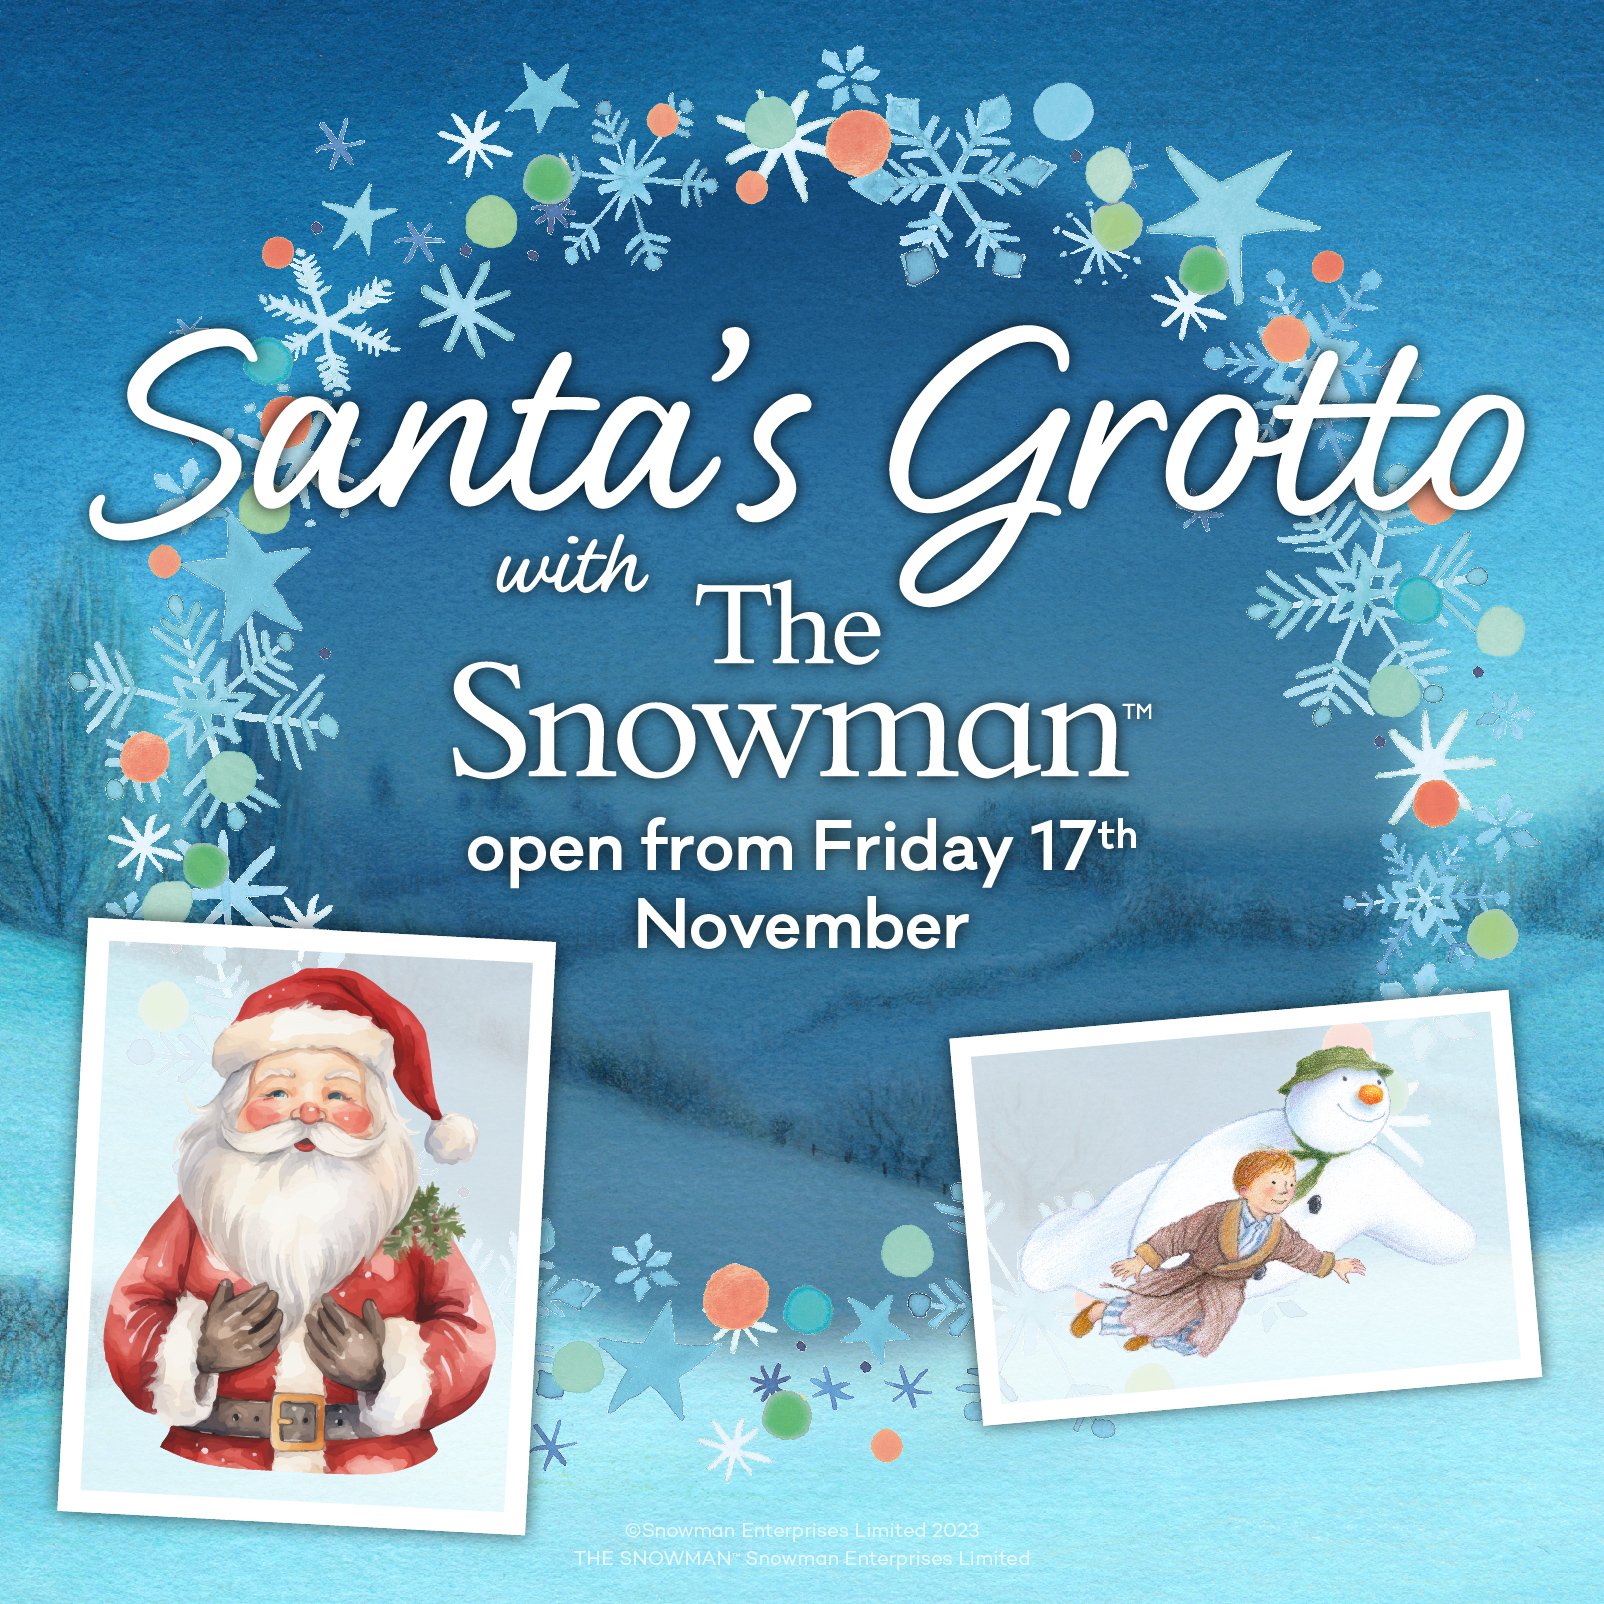 Santa’s Grotto with The Snowman